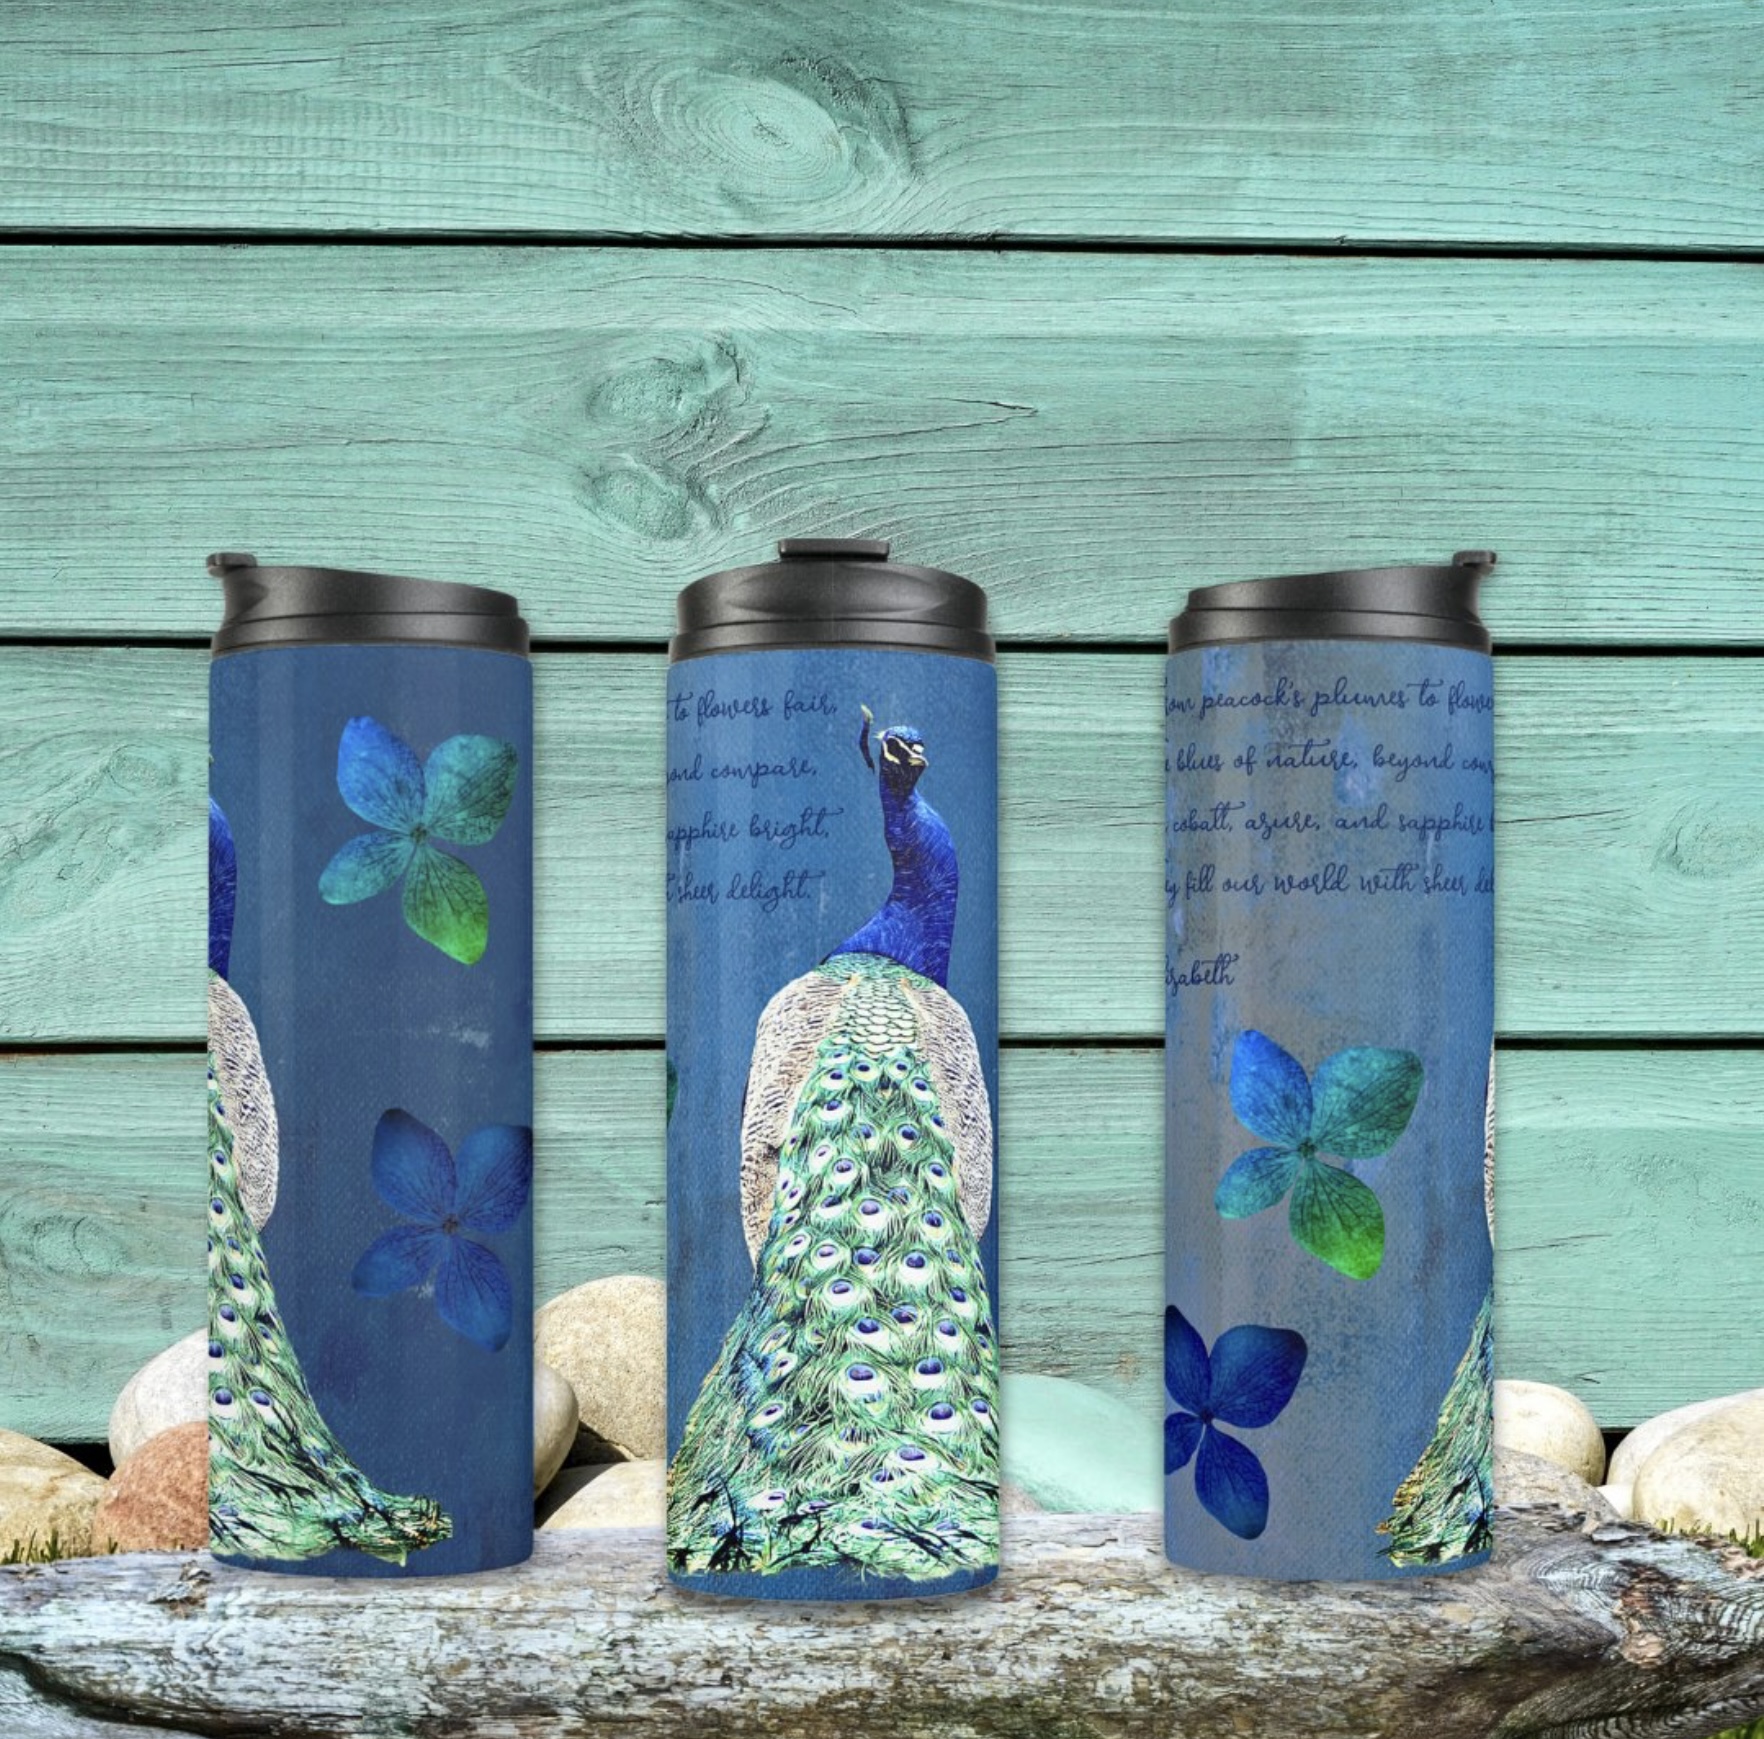 Three-sided view of the Vintage Peacock Custom Thermal Tumbler, showcasing its intricate peacock design and personalized customization